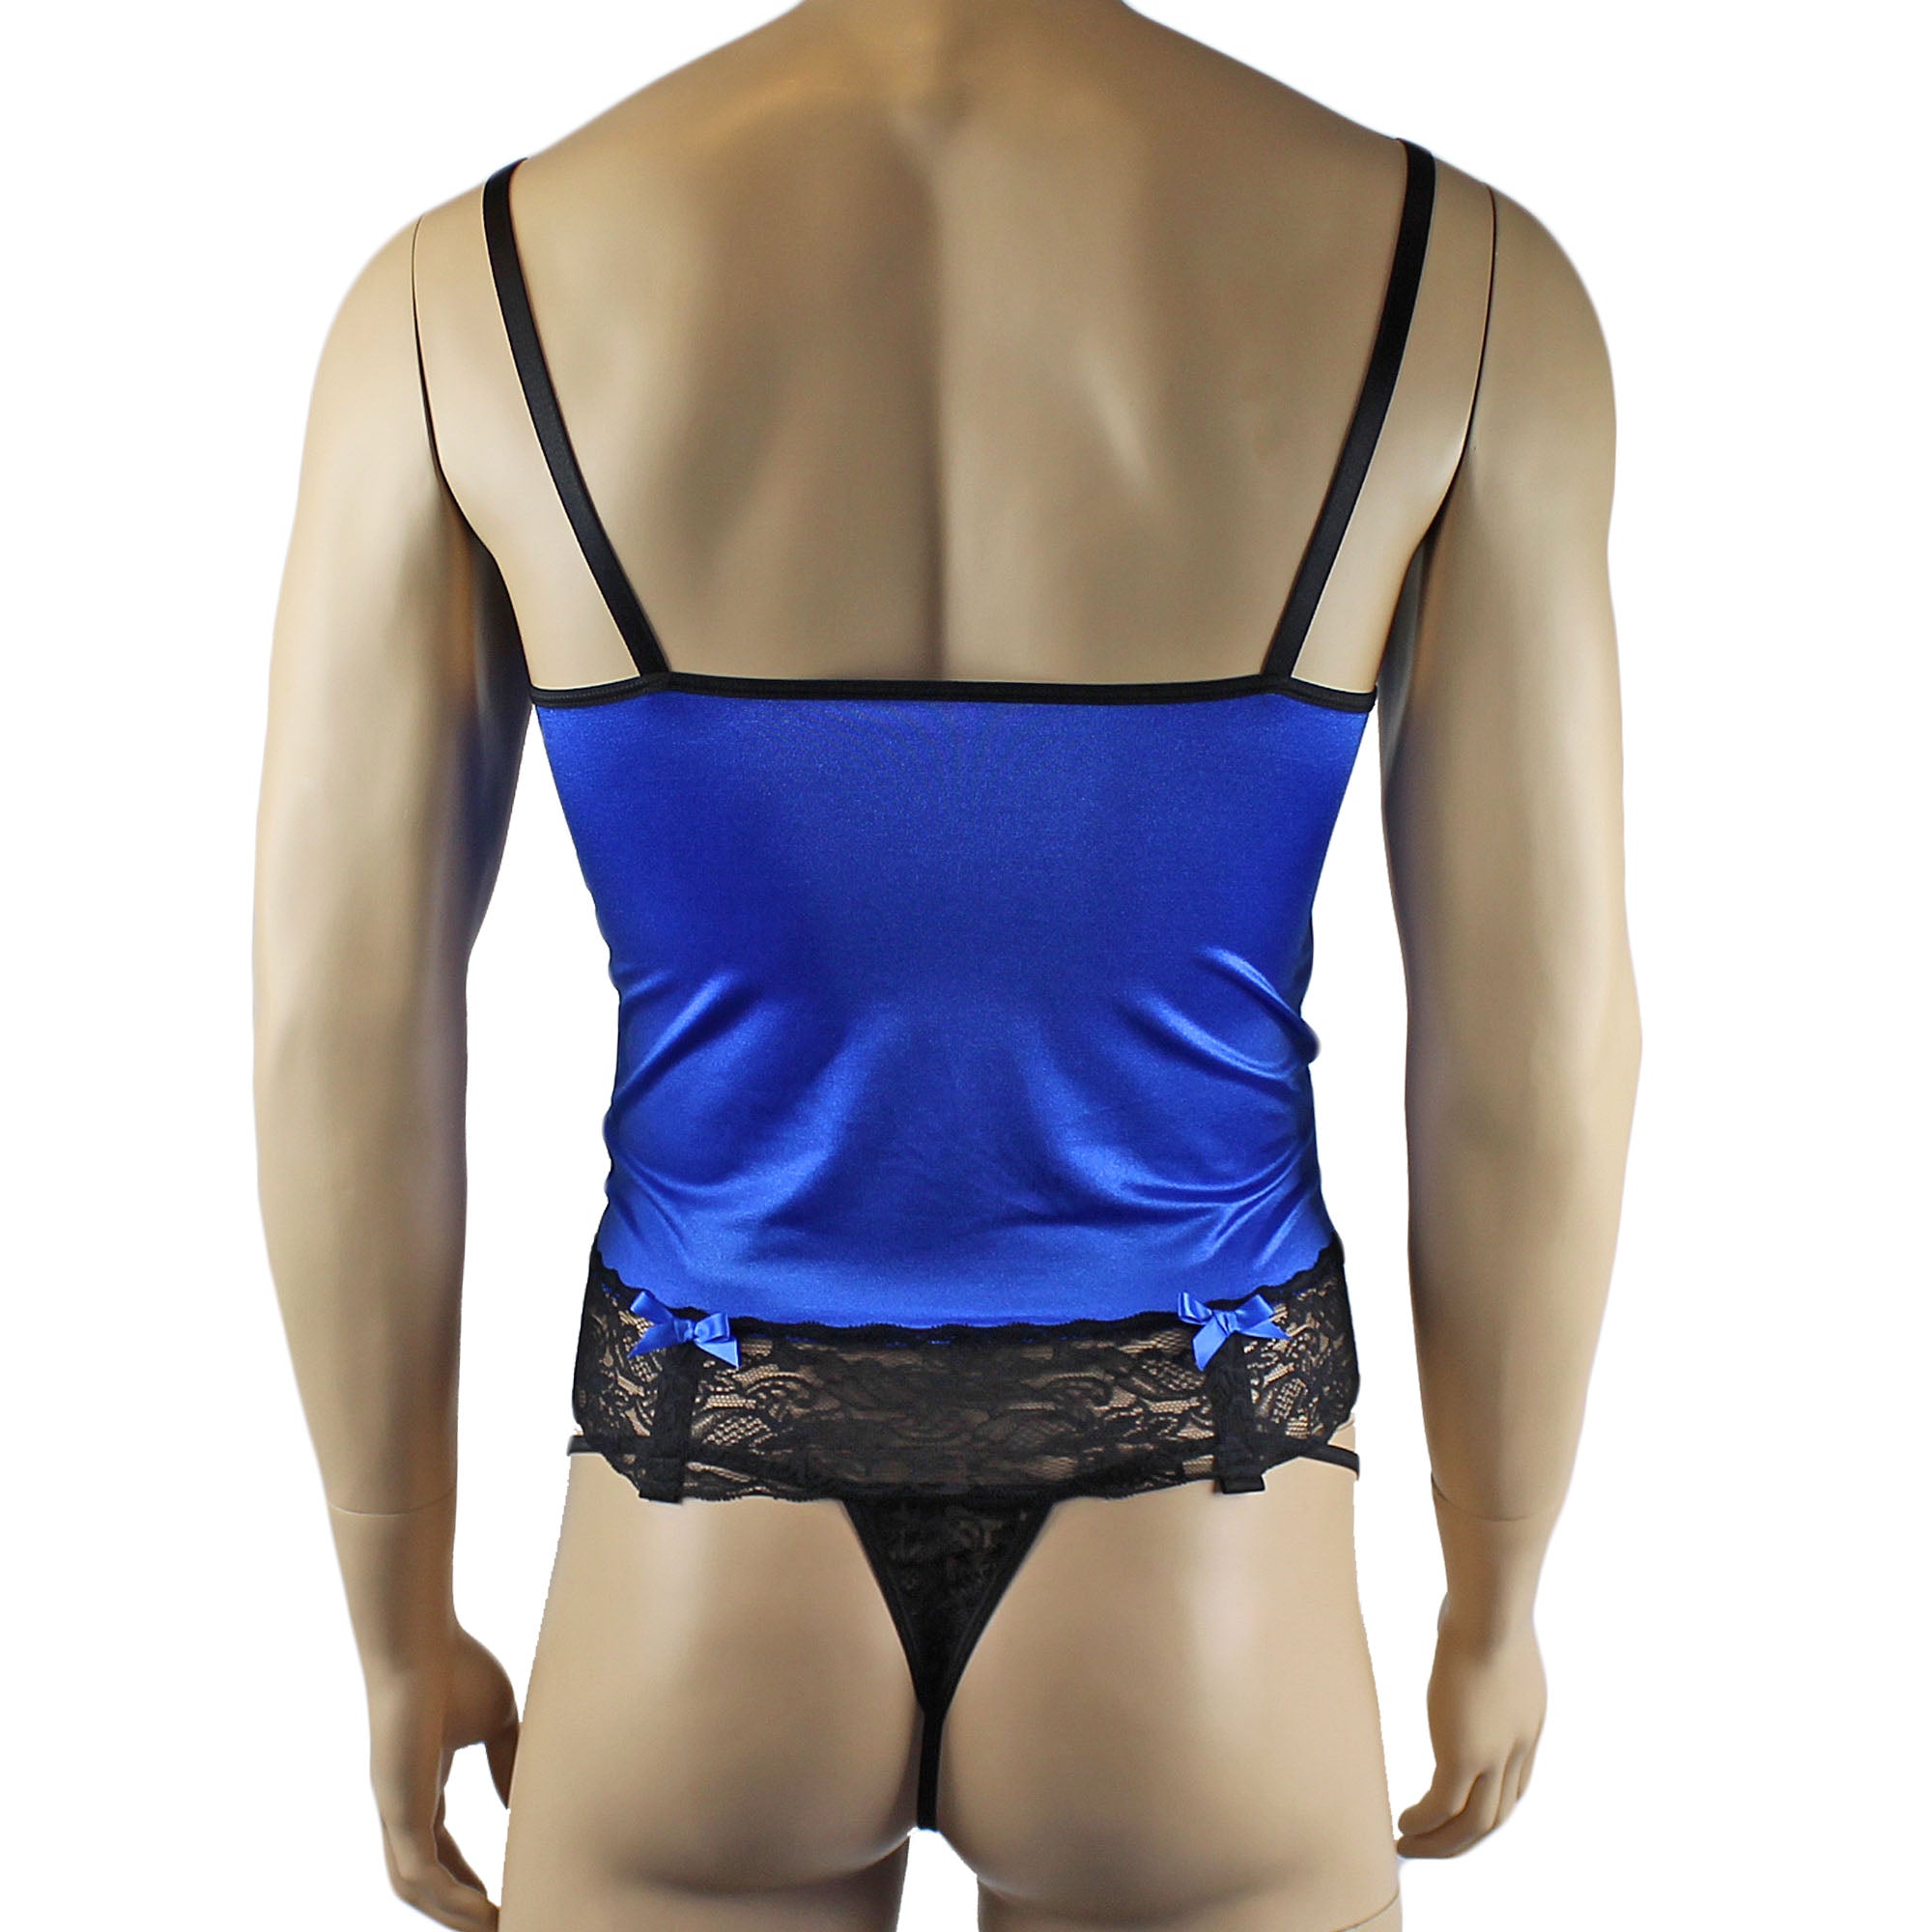 Mens Joanne Camisole Bustier Garter Top with Pouch G string & Stockings - Sizes up to 3XL Blue and Black Lace